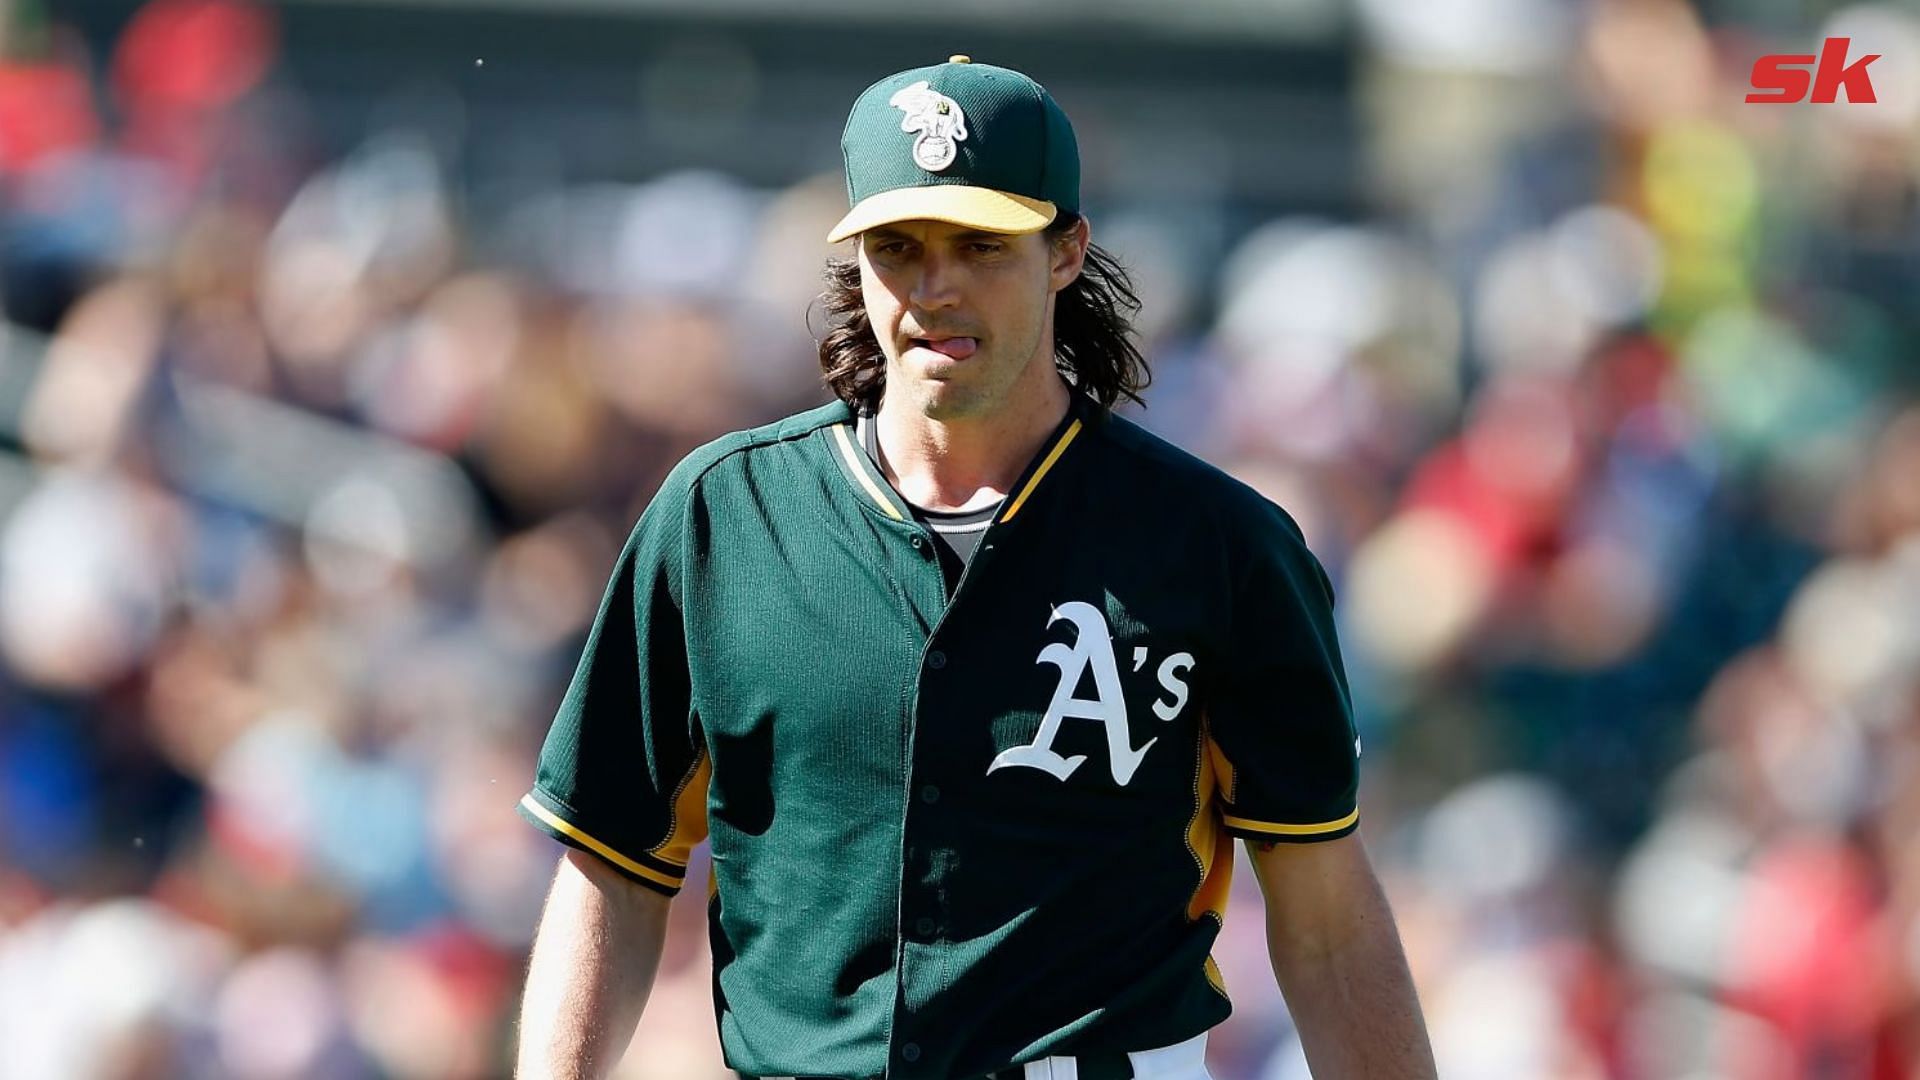 Barry Zito's Baseball Journey Is All About Gaining True Fulfillment